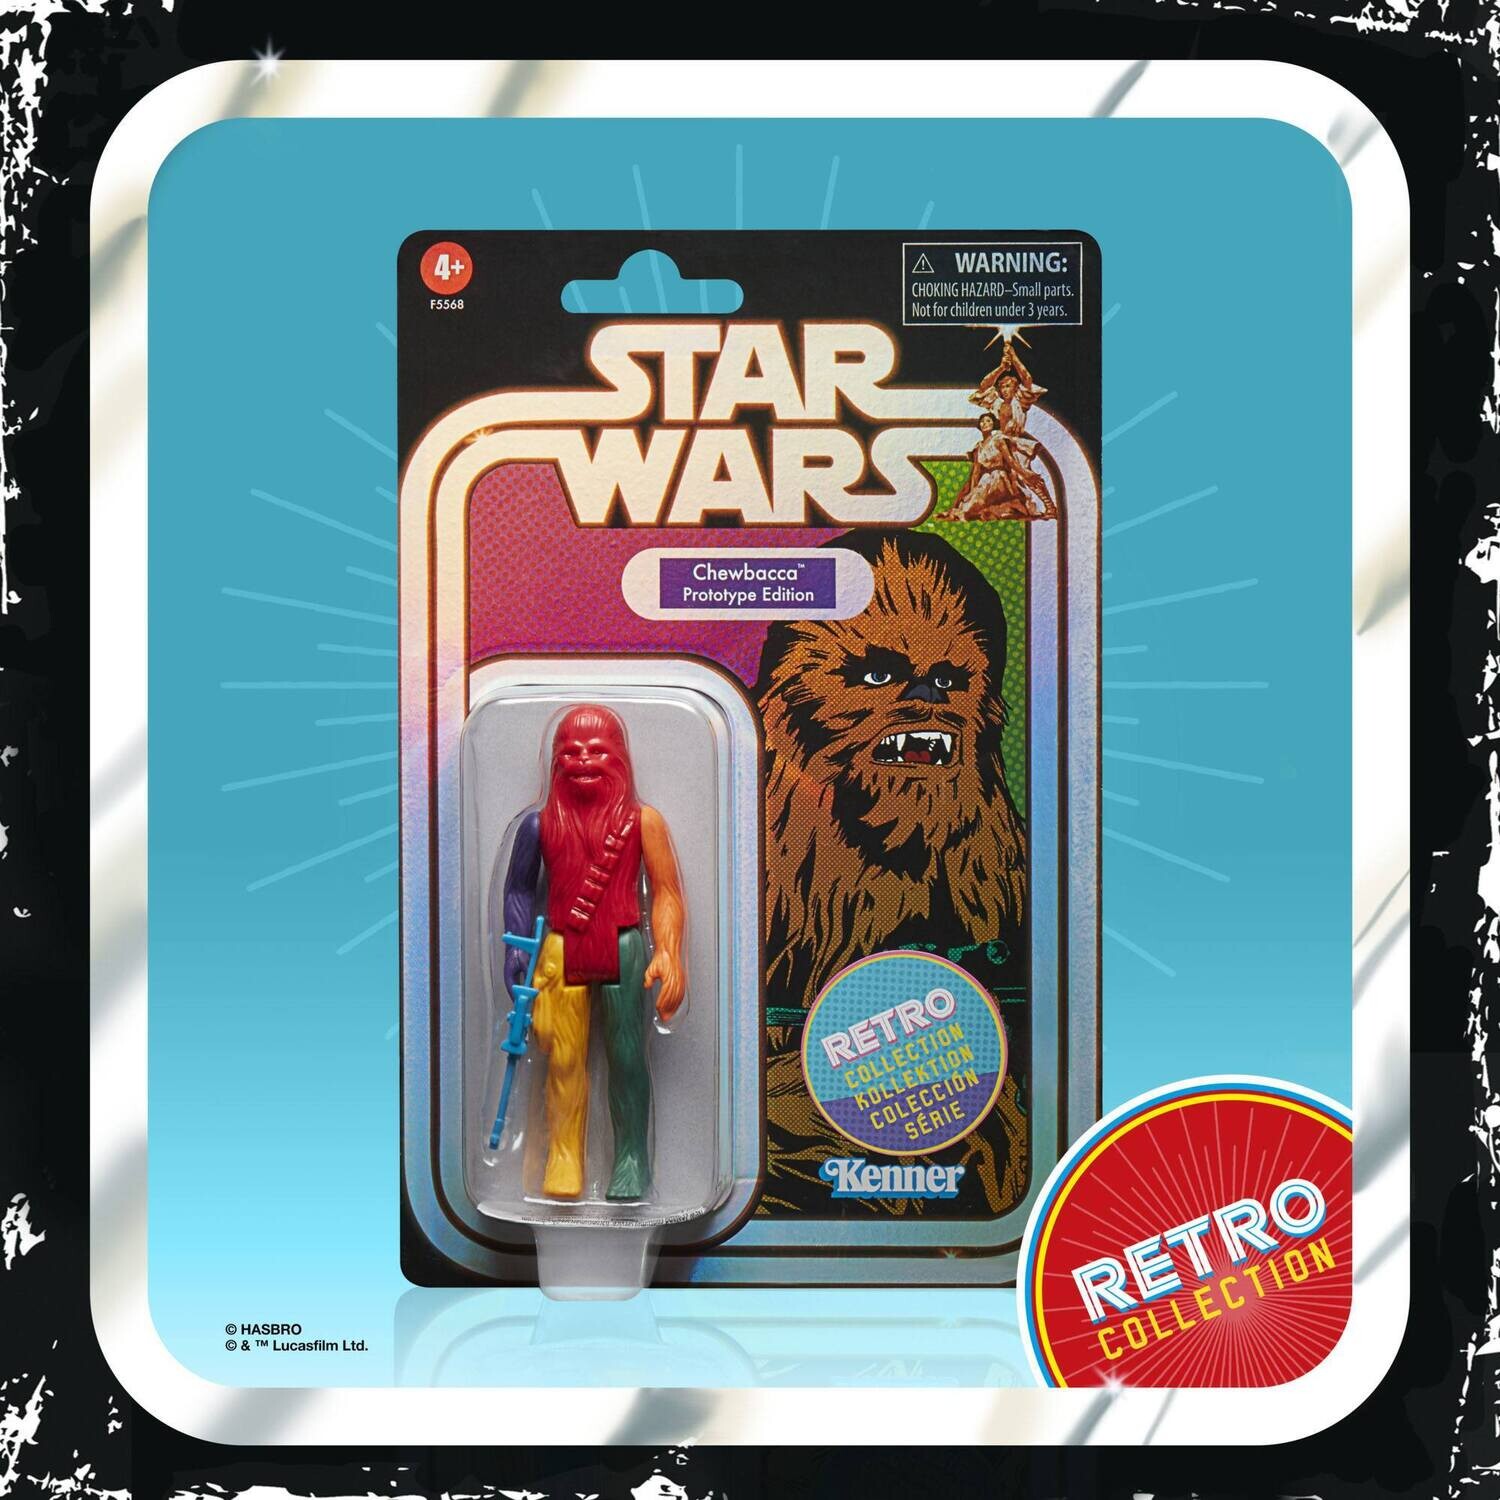 Star Wars Retro Collection Chewbacca Prototype Edition